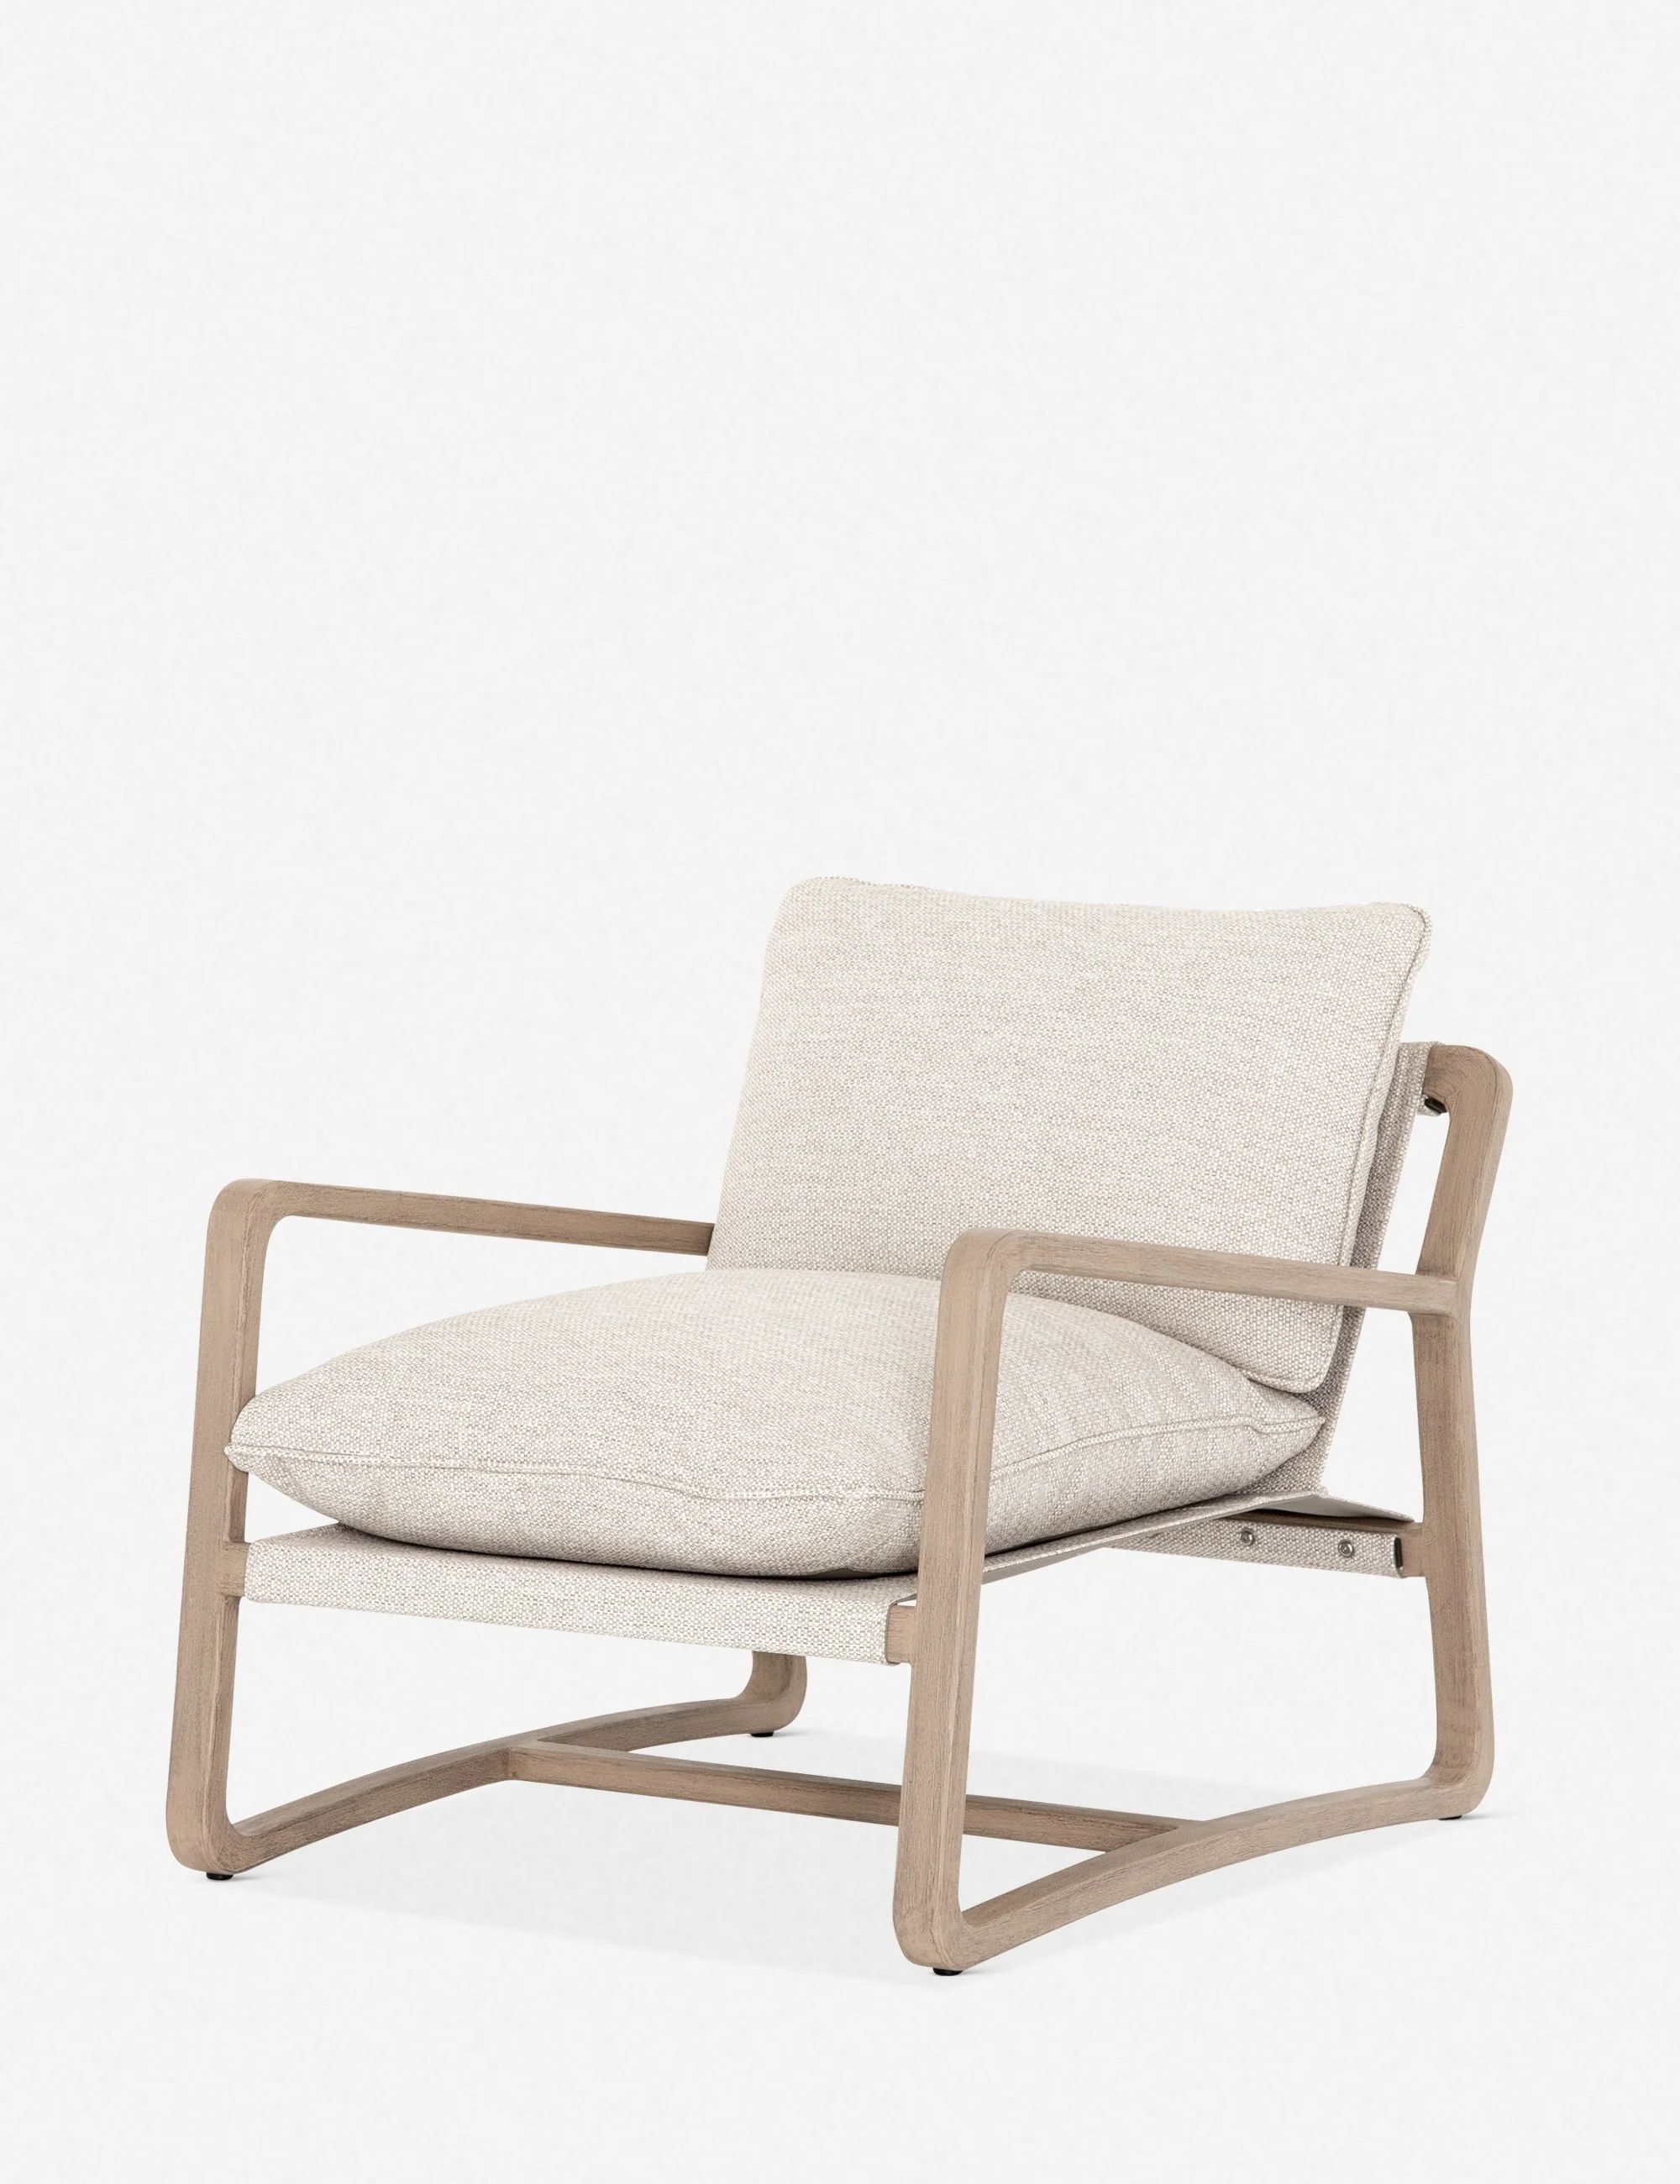 Nunelle Indoor / Outdoor Accent Chair | Lulu and Georgia 